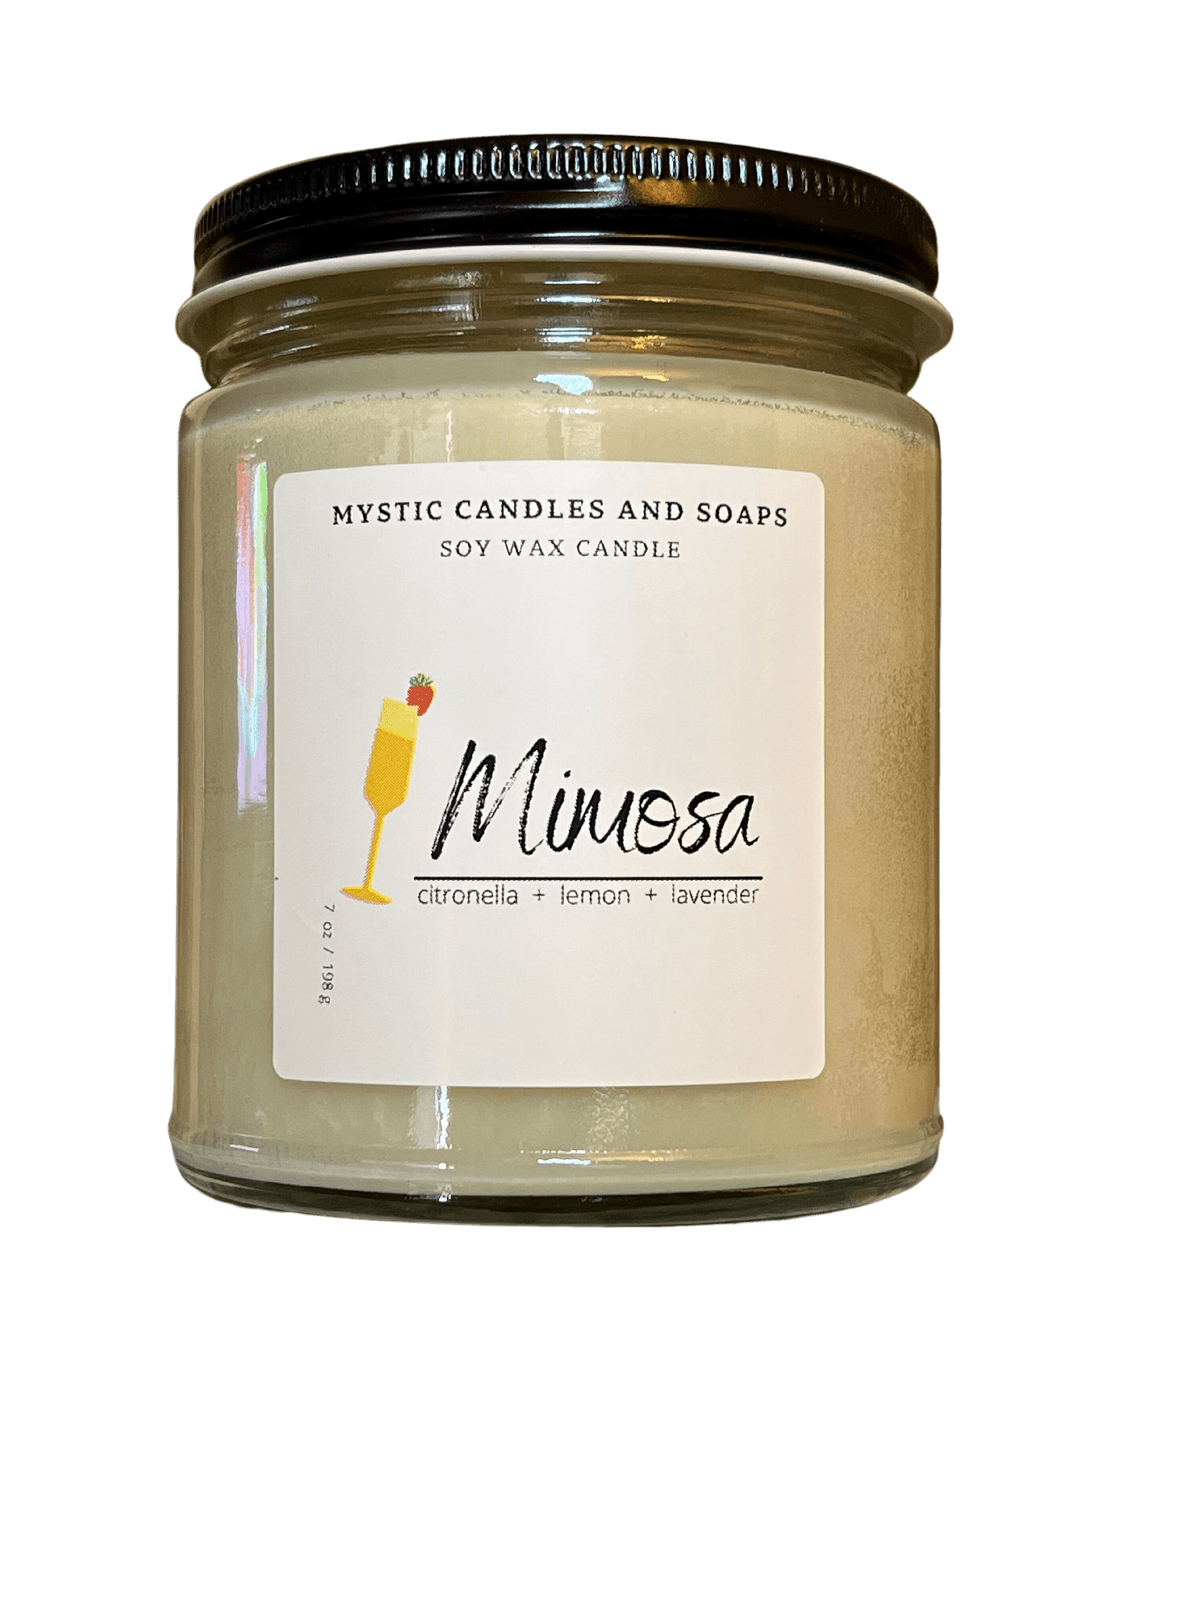 Mimosa Candle - Mystic Candles and Soaps LLC